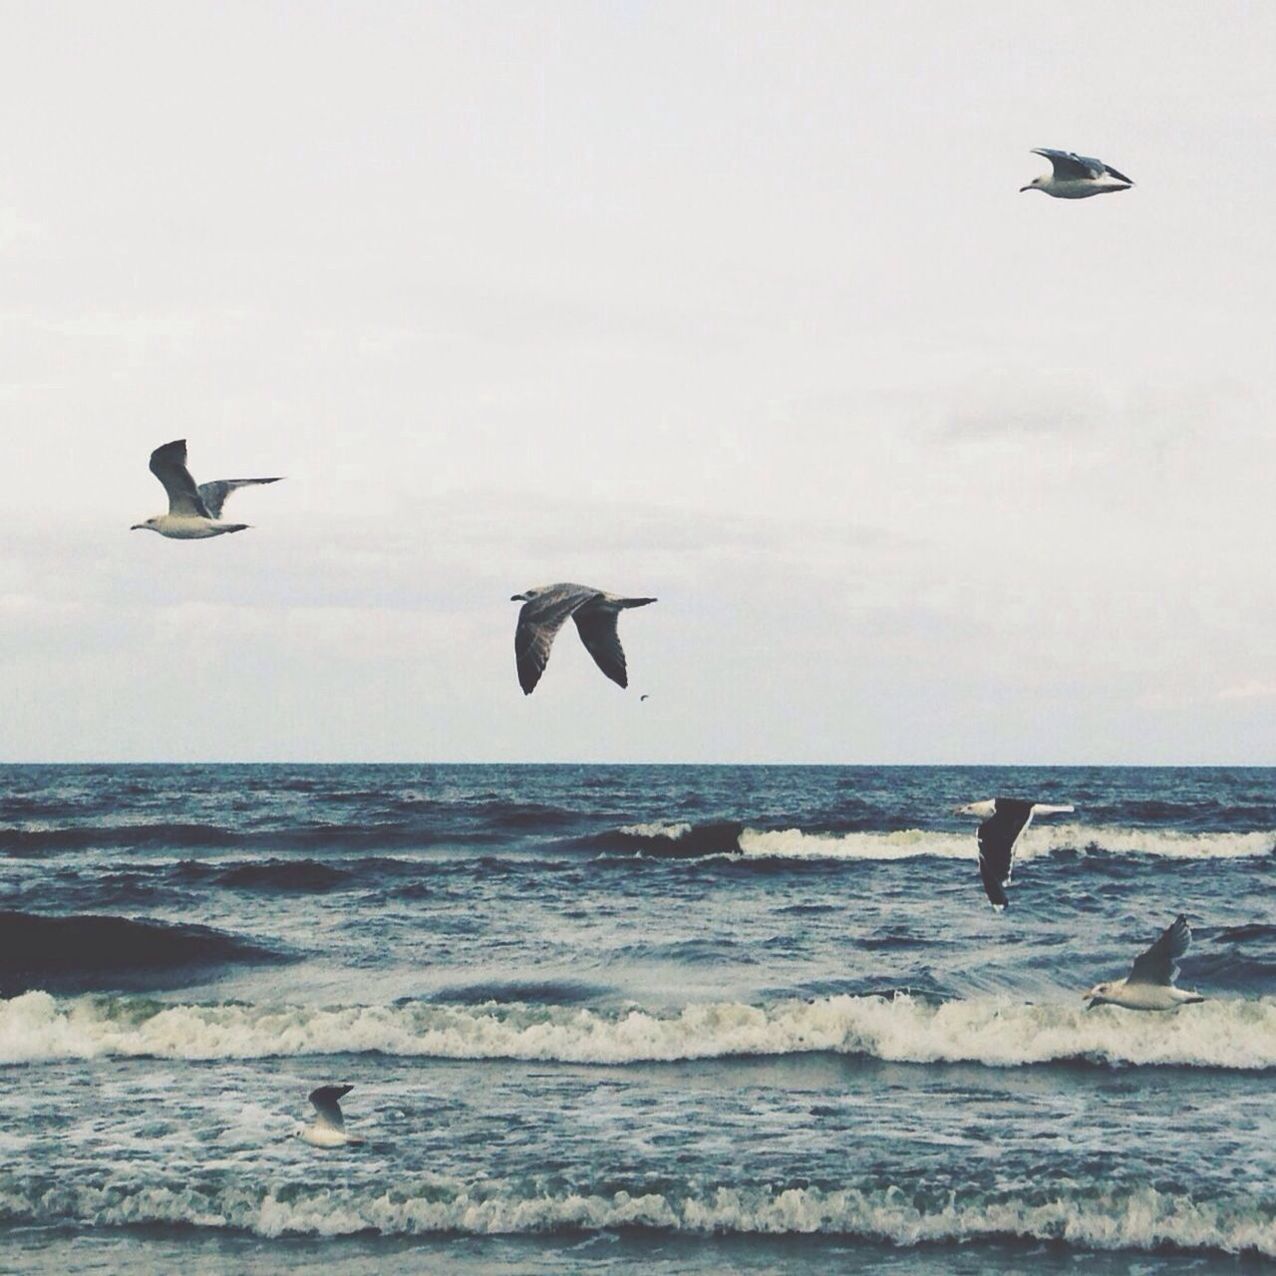 Seagulls by sea